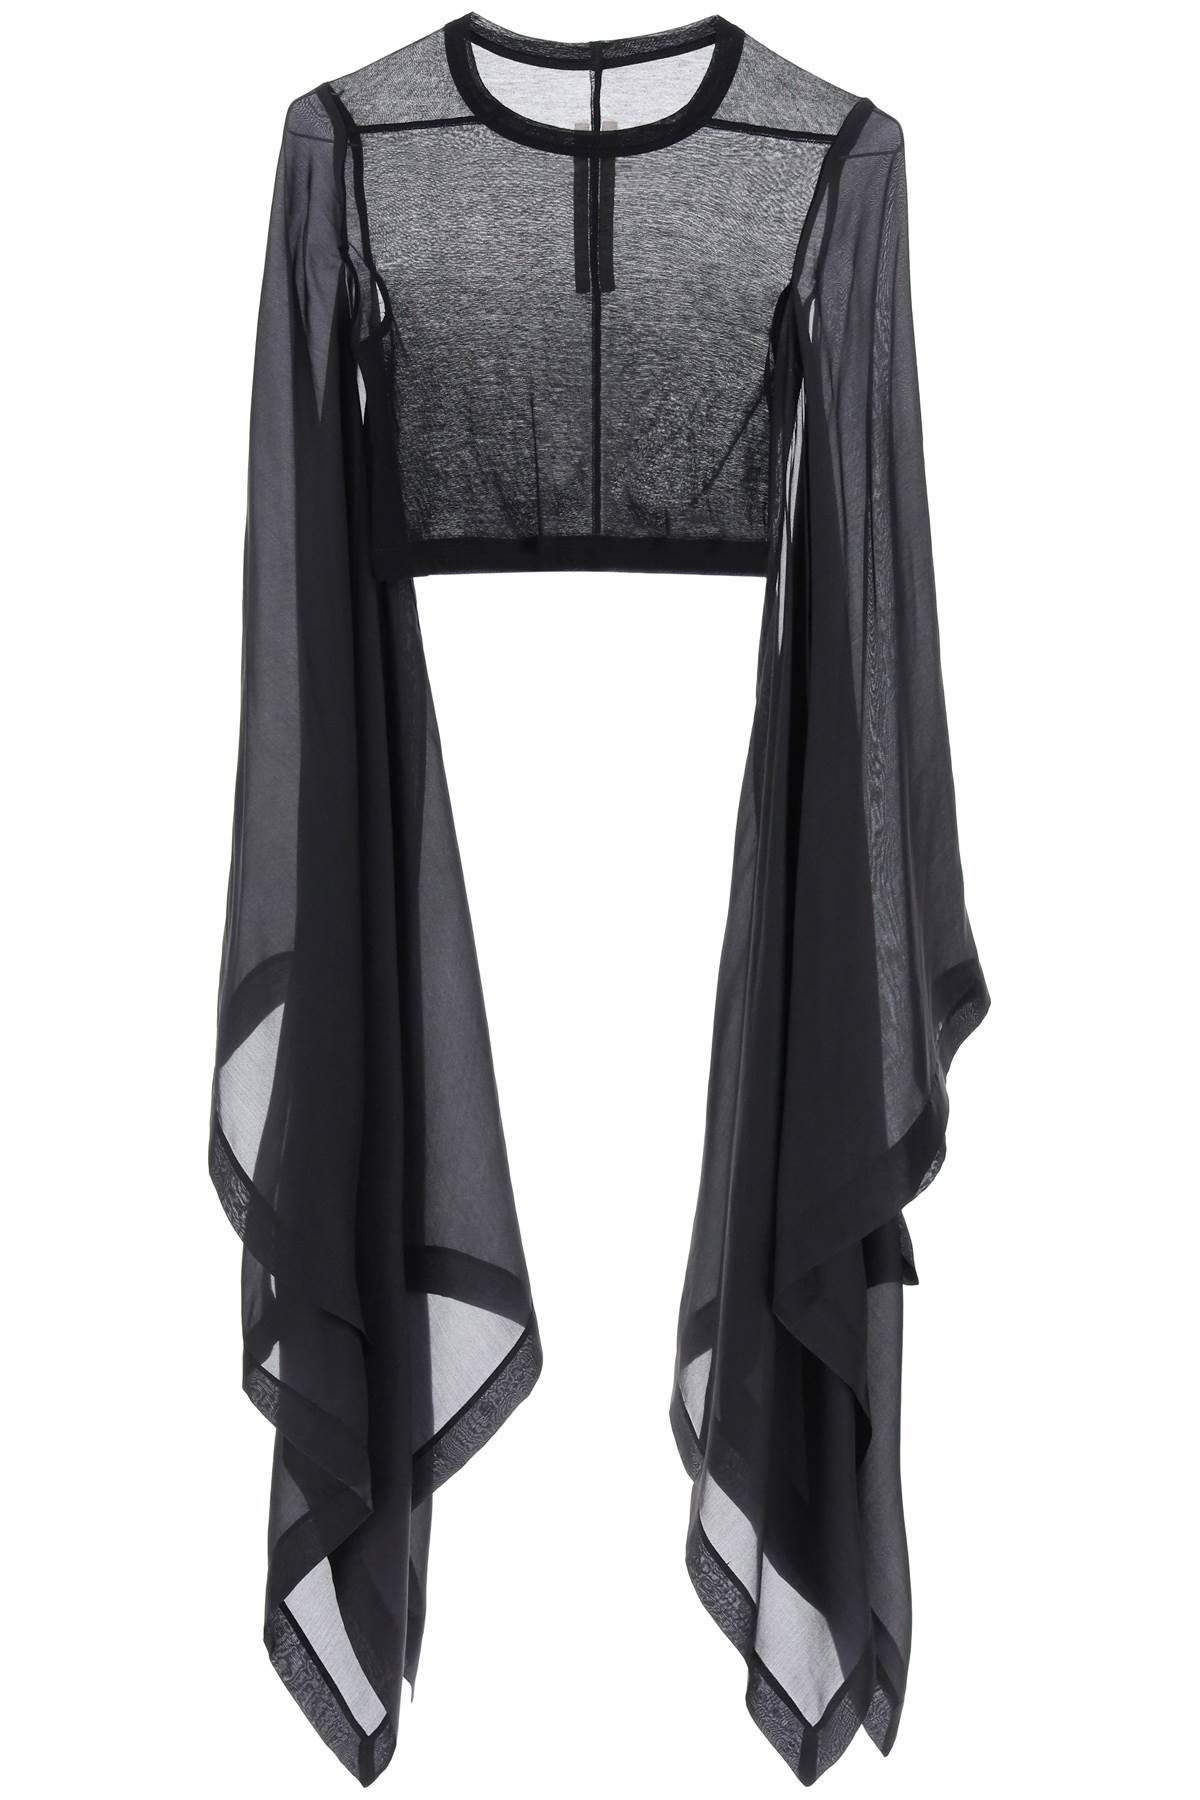 Rick Owens RICK OWENS "cropped top with cape sleeves"